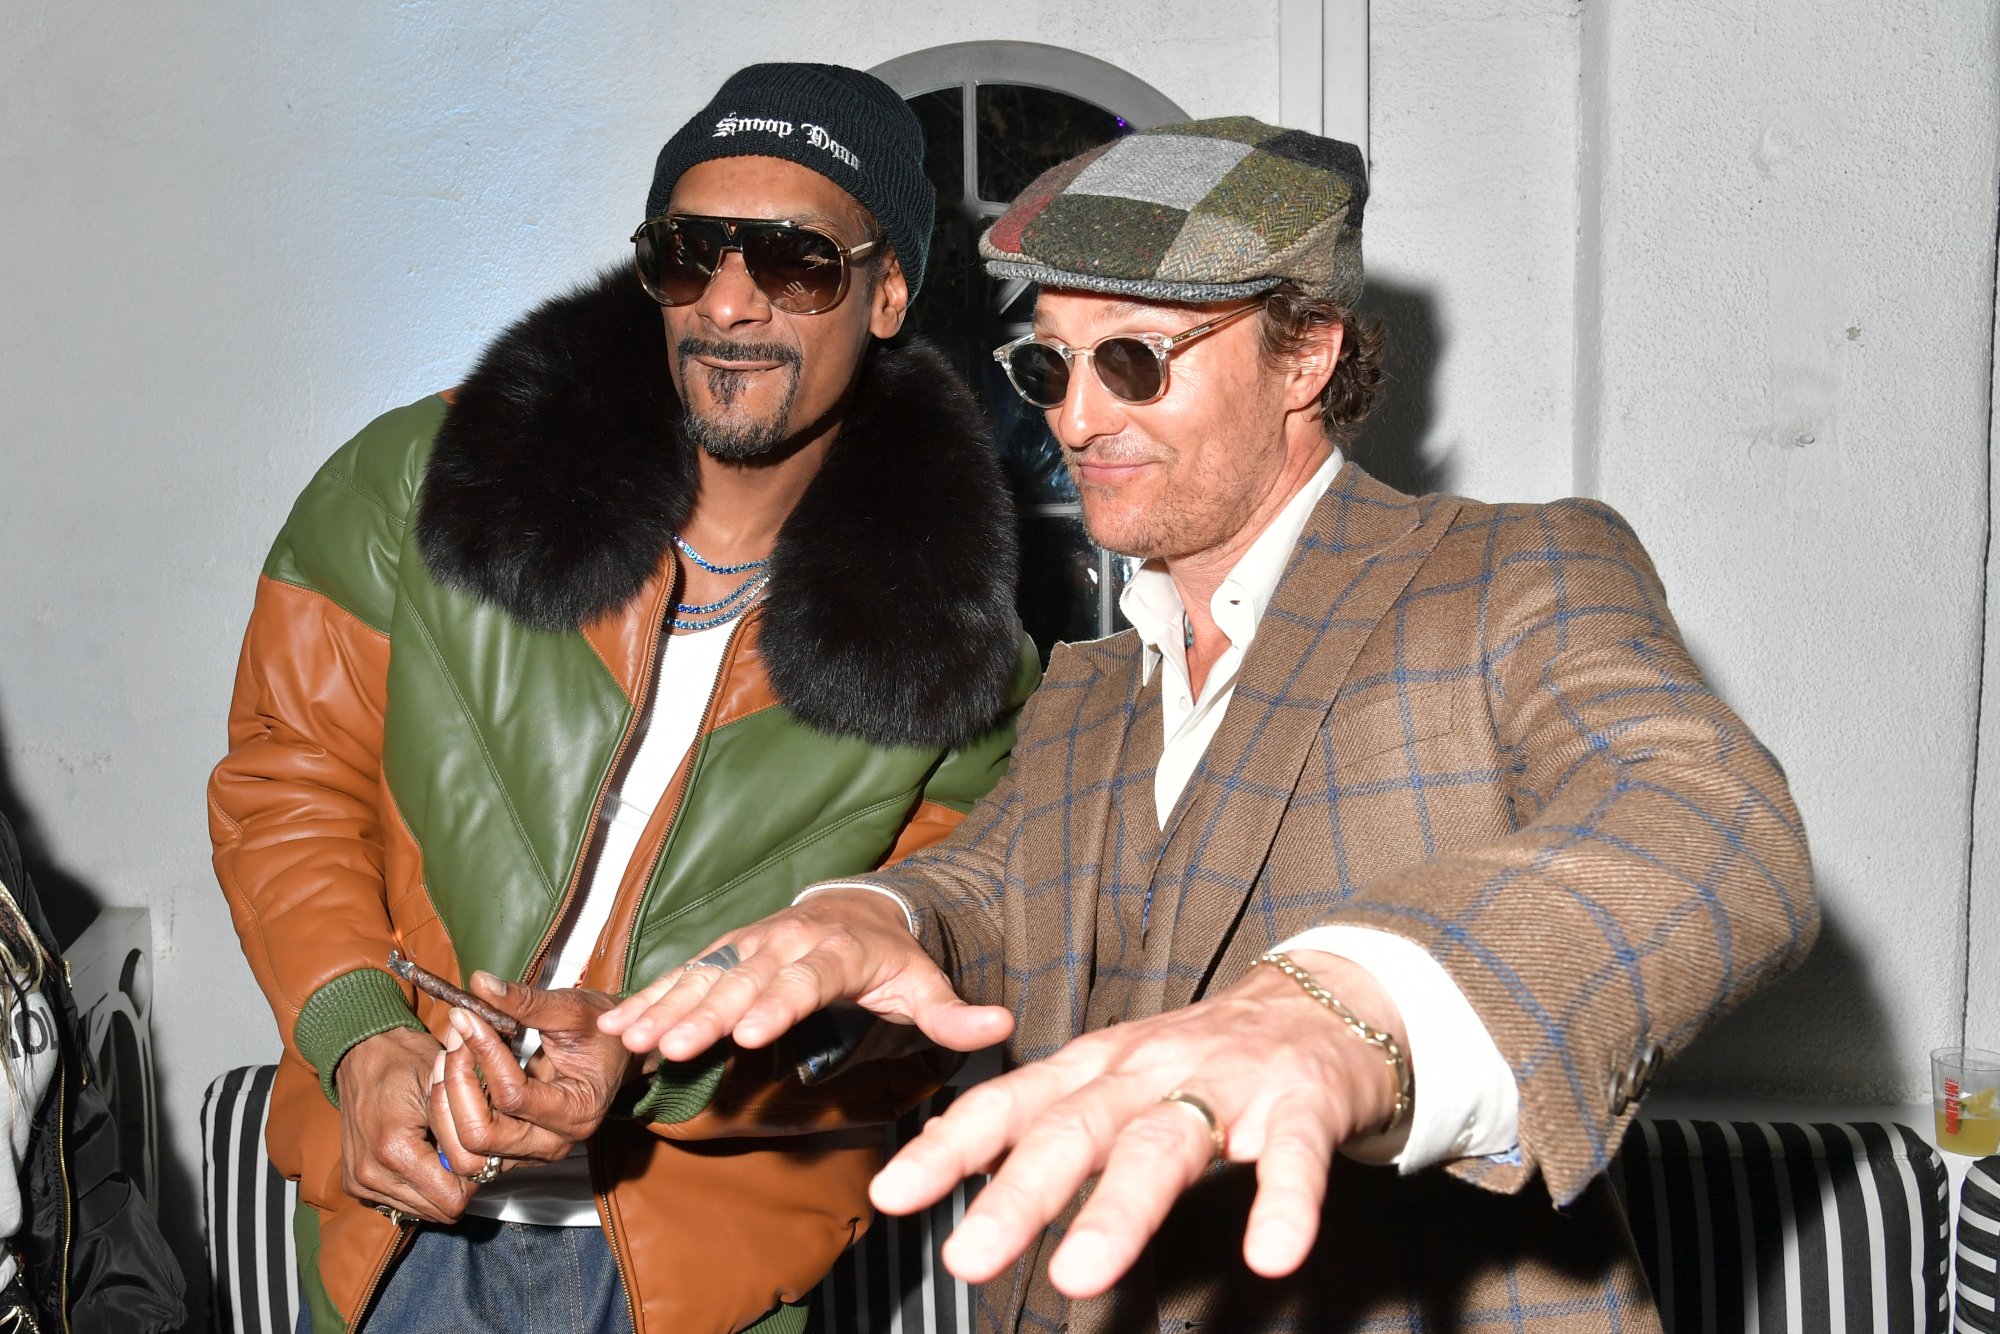 'The Beach Bum' stars Snoop Dogg and Matthew McConaughey honoring 420 Day-celebrating movie wearing sunglasses and hats at a party